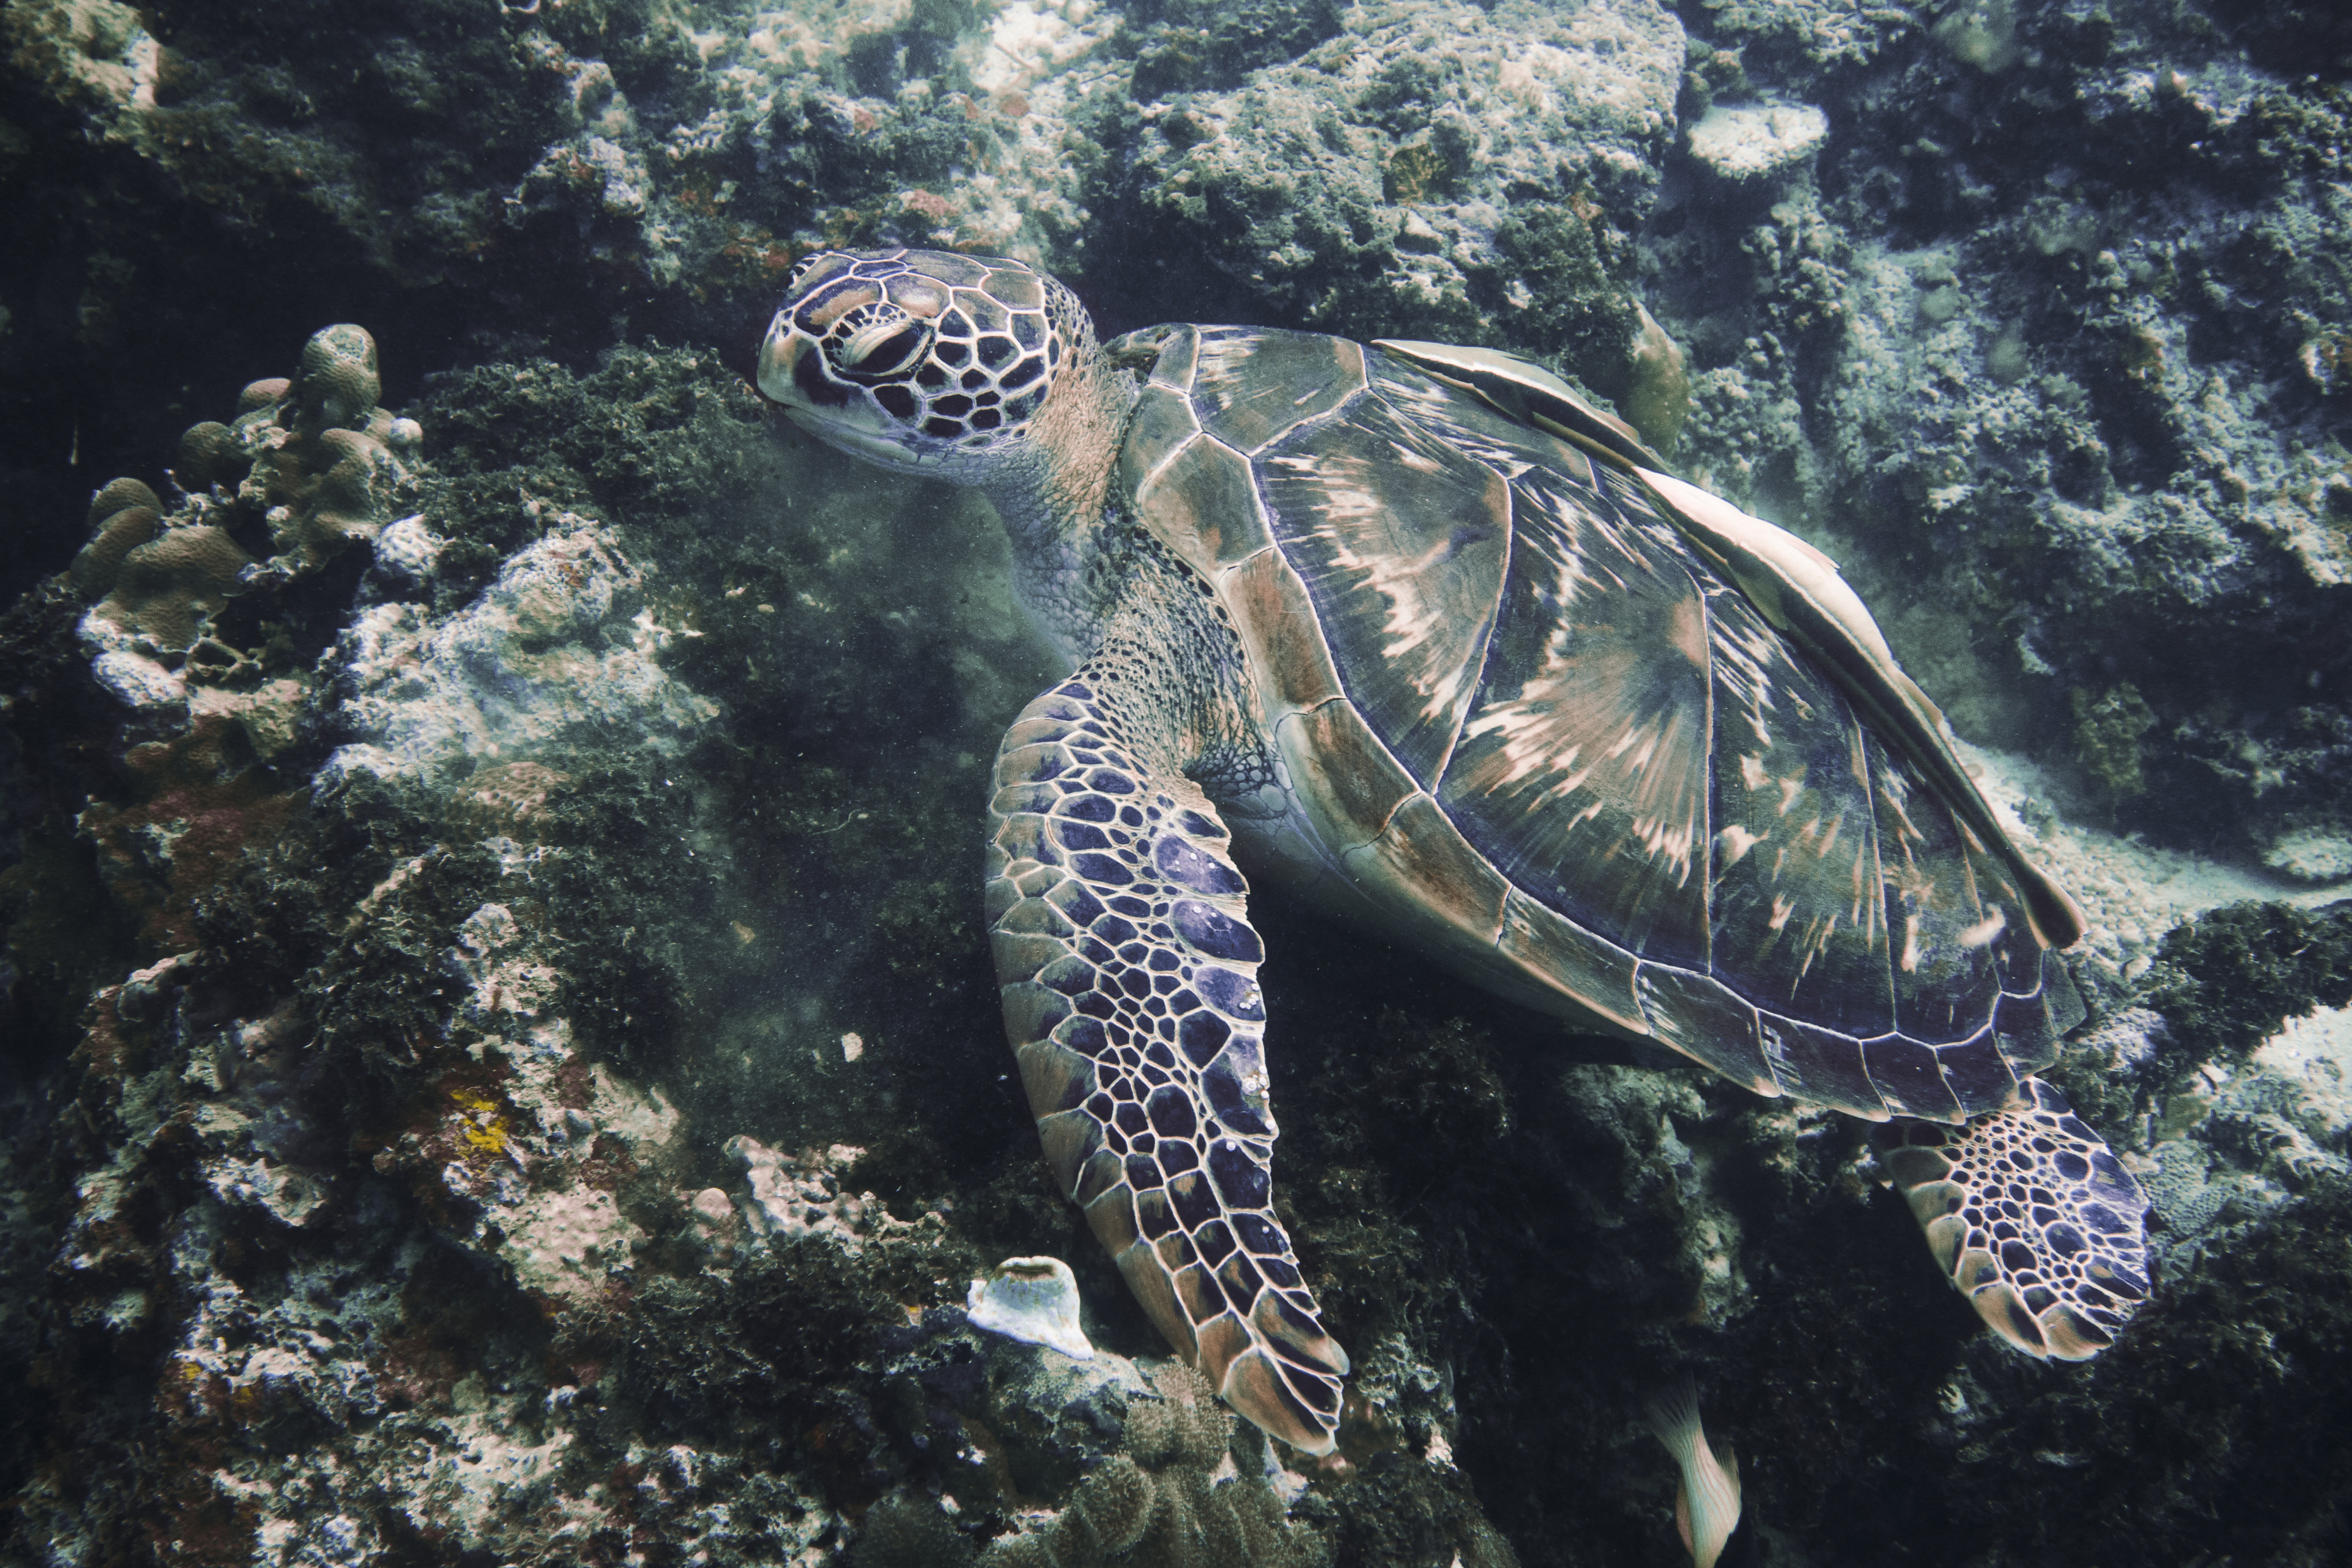 Super Typhoon Rai smashed into diving hotspot Mactan island, in the Philippines in 2021, destroying hard and soft coral and damaging property. The storm also brought some new inhabitants, including turtles. Photo: Sarah Gillespie